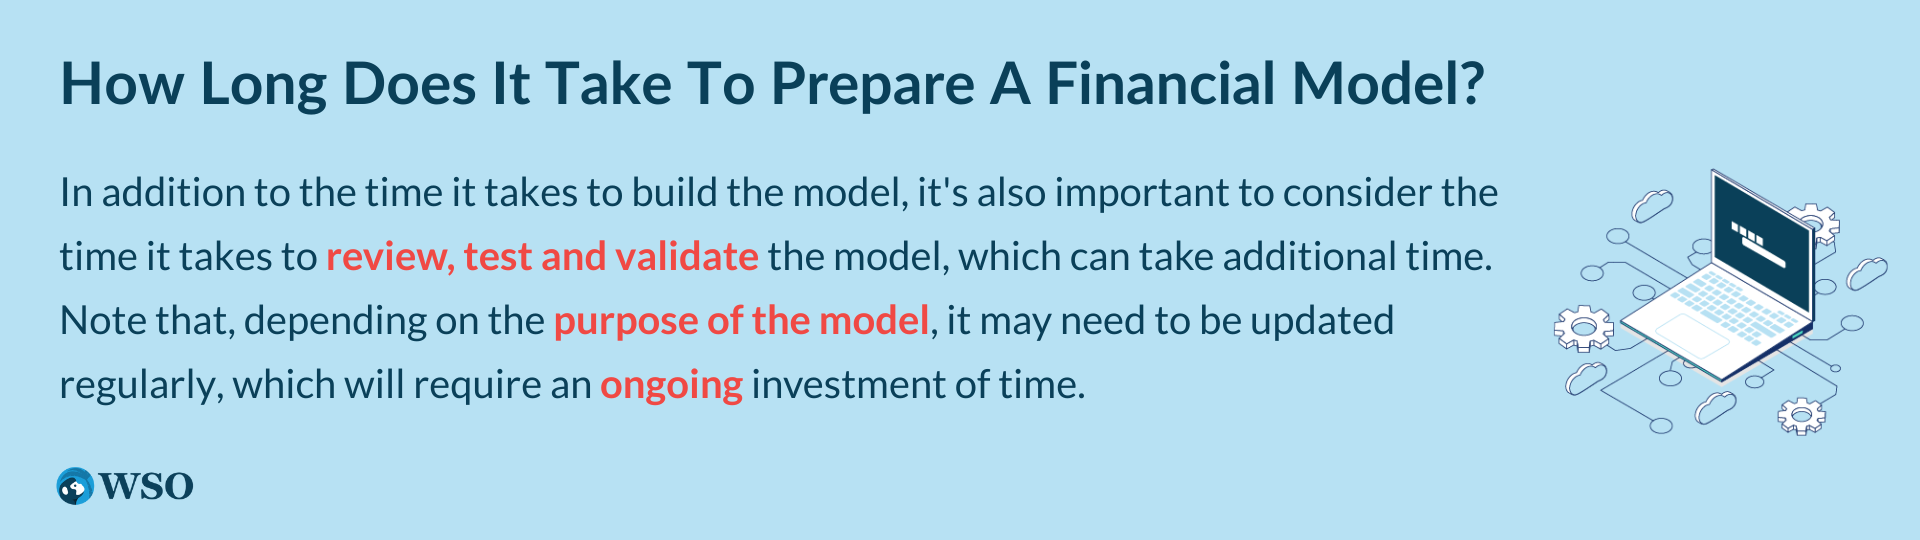 How Long Does It Take To Prepare A Financial Model?